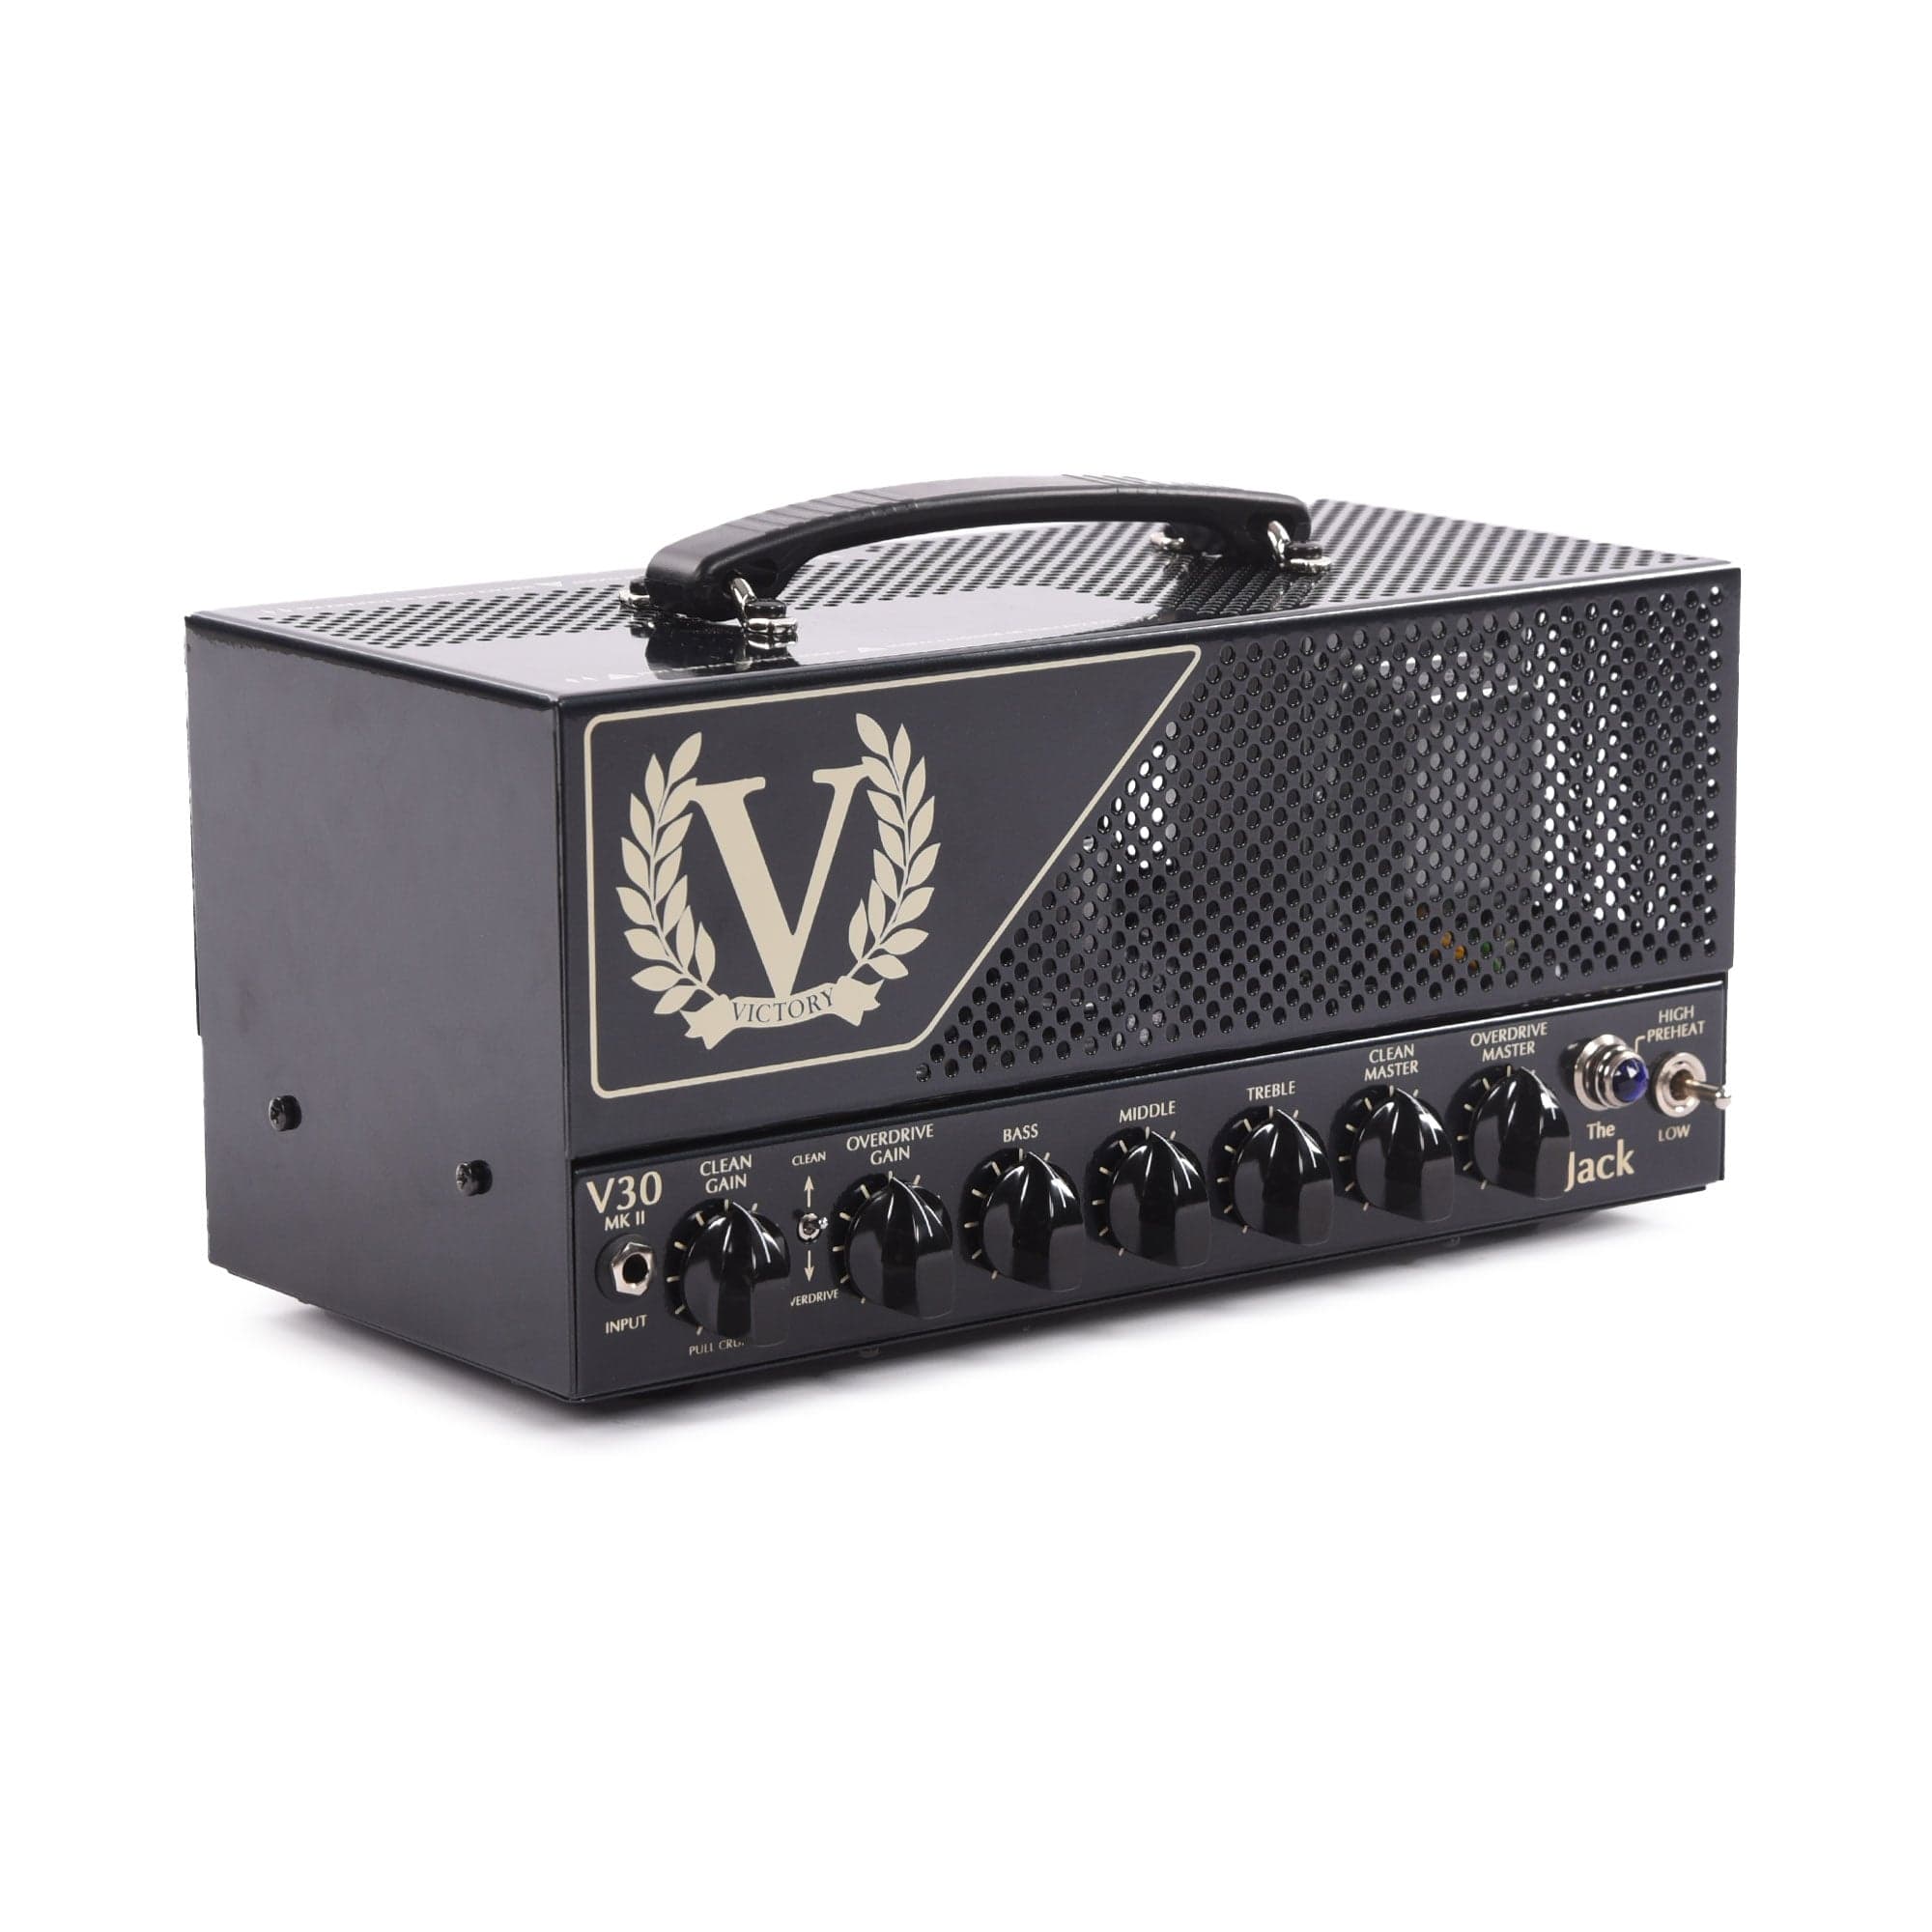 Victory V30 The Jack MKII 42W Compact Head Amps / Guitar Heads